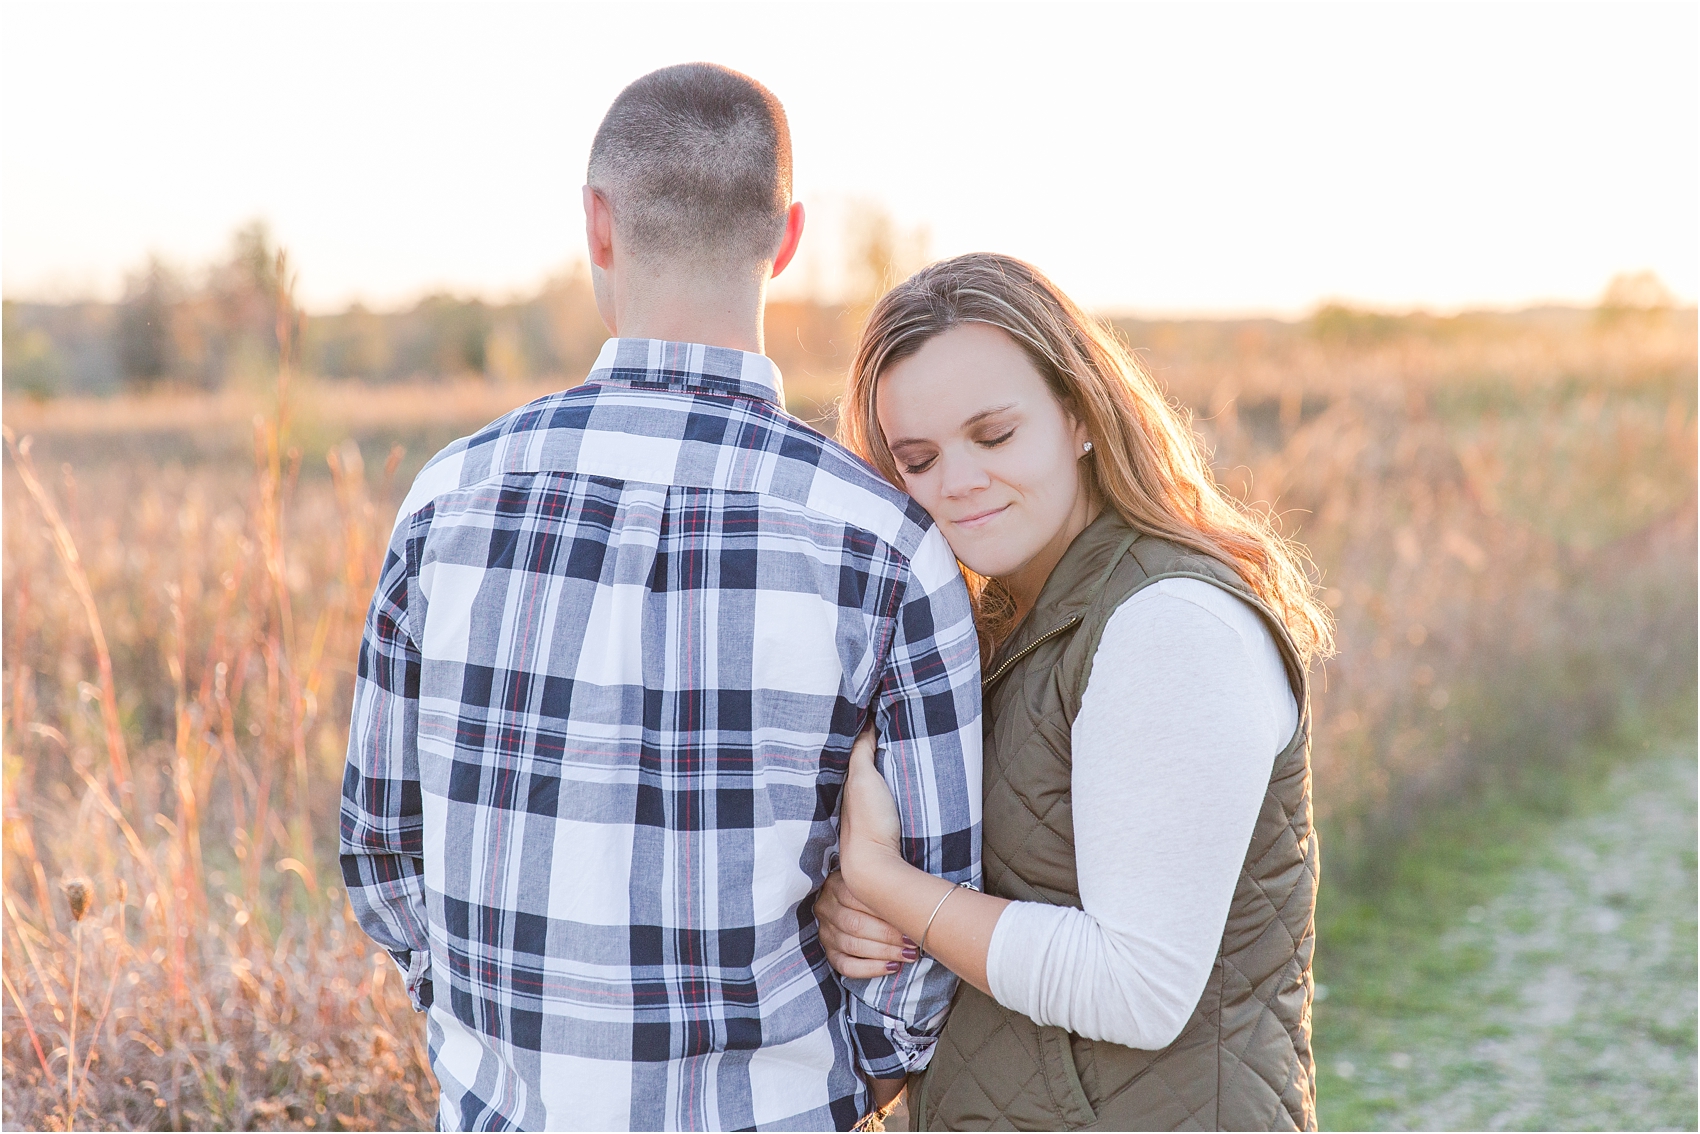 romantic-fall-engagement-photos-at-indian-springs-metropark-in-clarkston-mi-by-courtney-carolyn-photography_0008.jpg